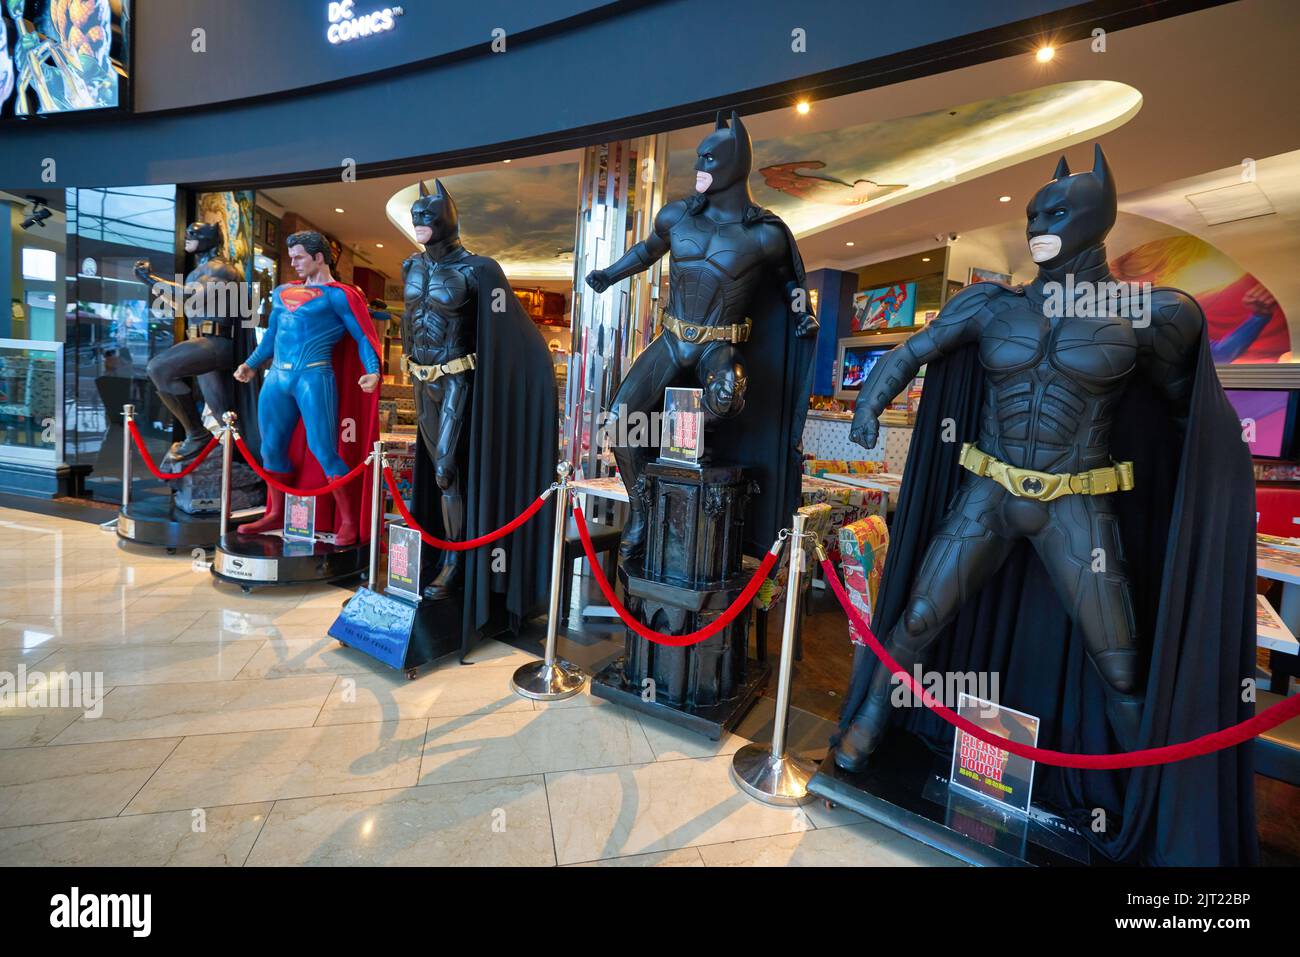 SINGAPORE - JANUARY 20, 2020: Batman life-size statues on display at DC Comics Super Heroes Cafe at the Shoppes at Marina Bay Sands in Singapore. Stock Photo